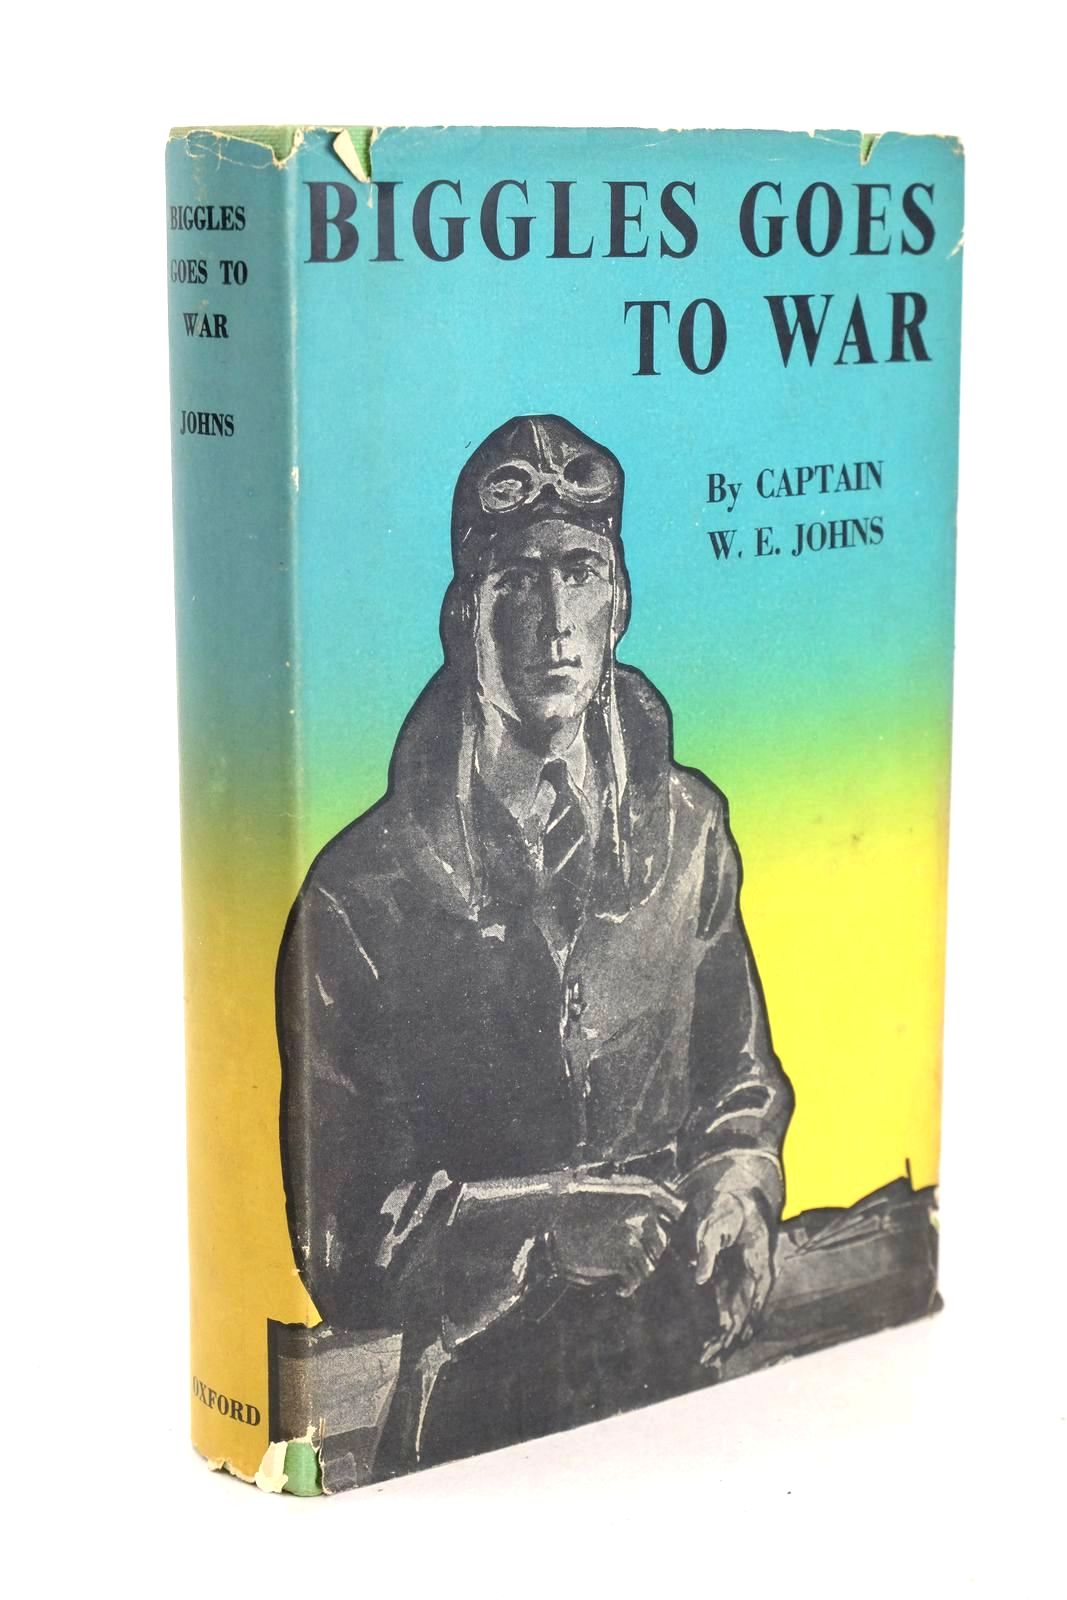 Photo of BIGGLES GOES TO WAR written by Johns, W.E. illustrated by Tyas, Martin published by Oxford University Press, Geoffrey Cumberlege (STOCK CODE: 1326223)  for sale by Stella & Rose's Books